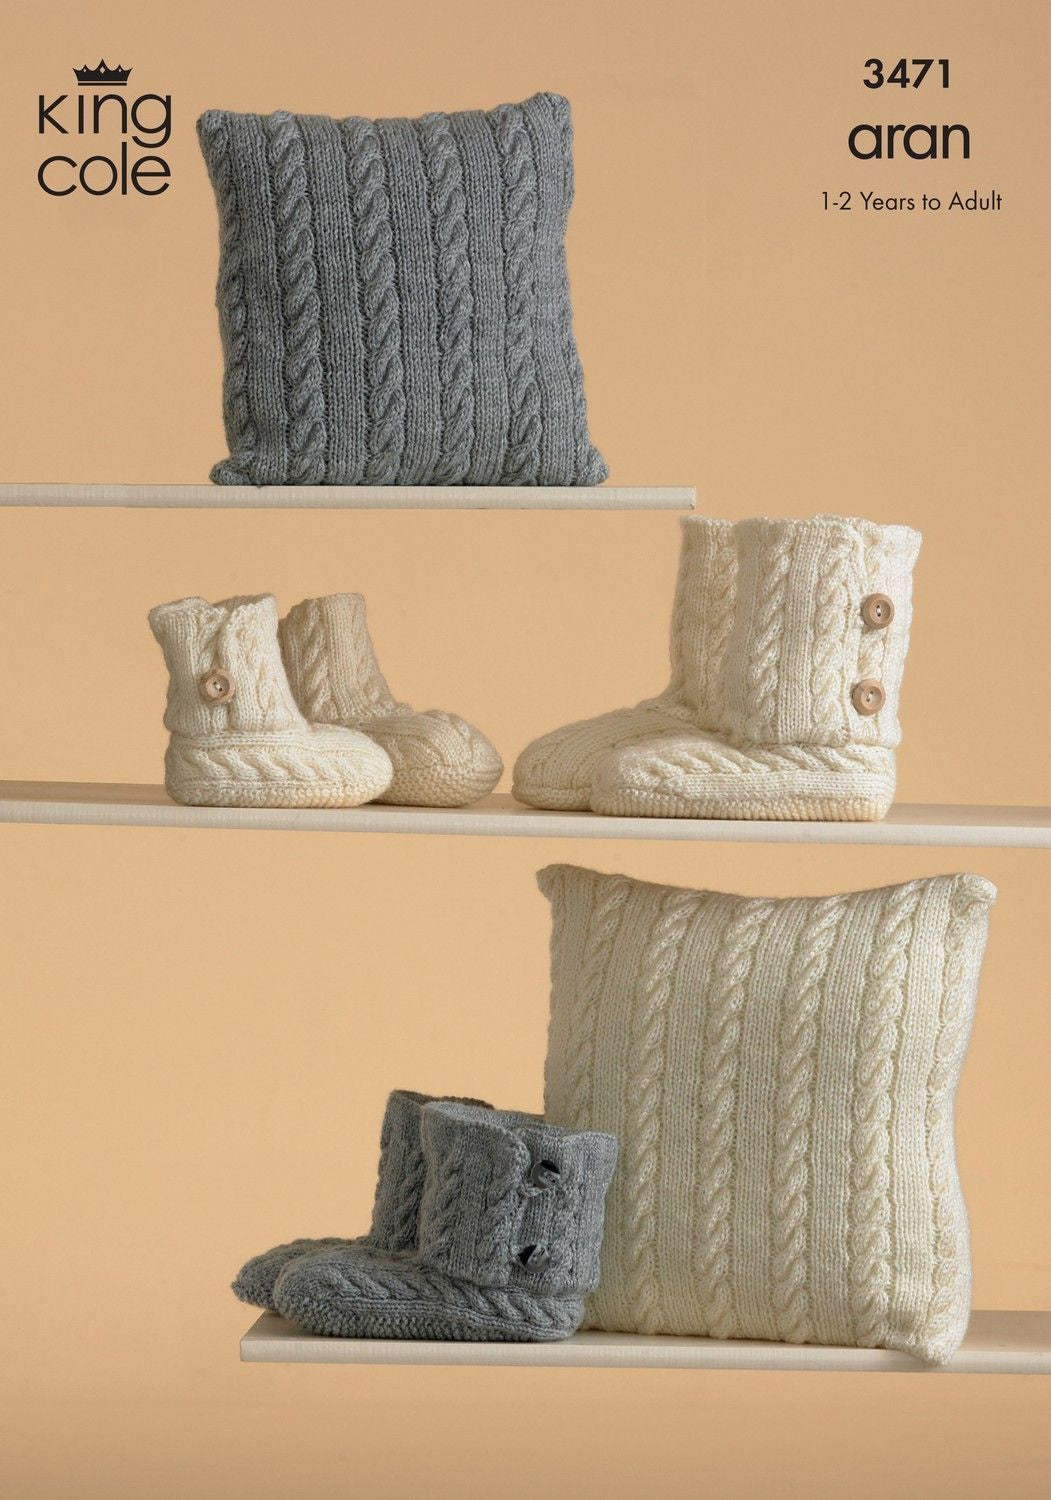 Knitting Pattern 3471 - Slippers and Cushions in King Cole Fashion Aran